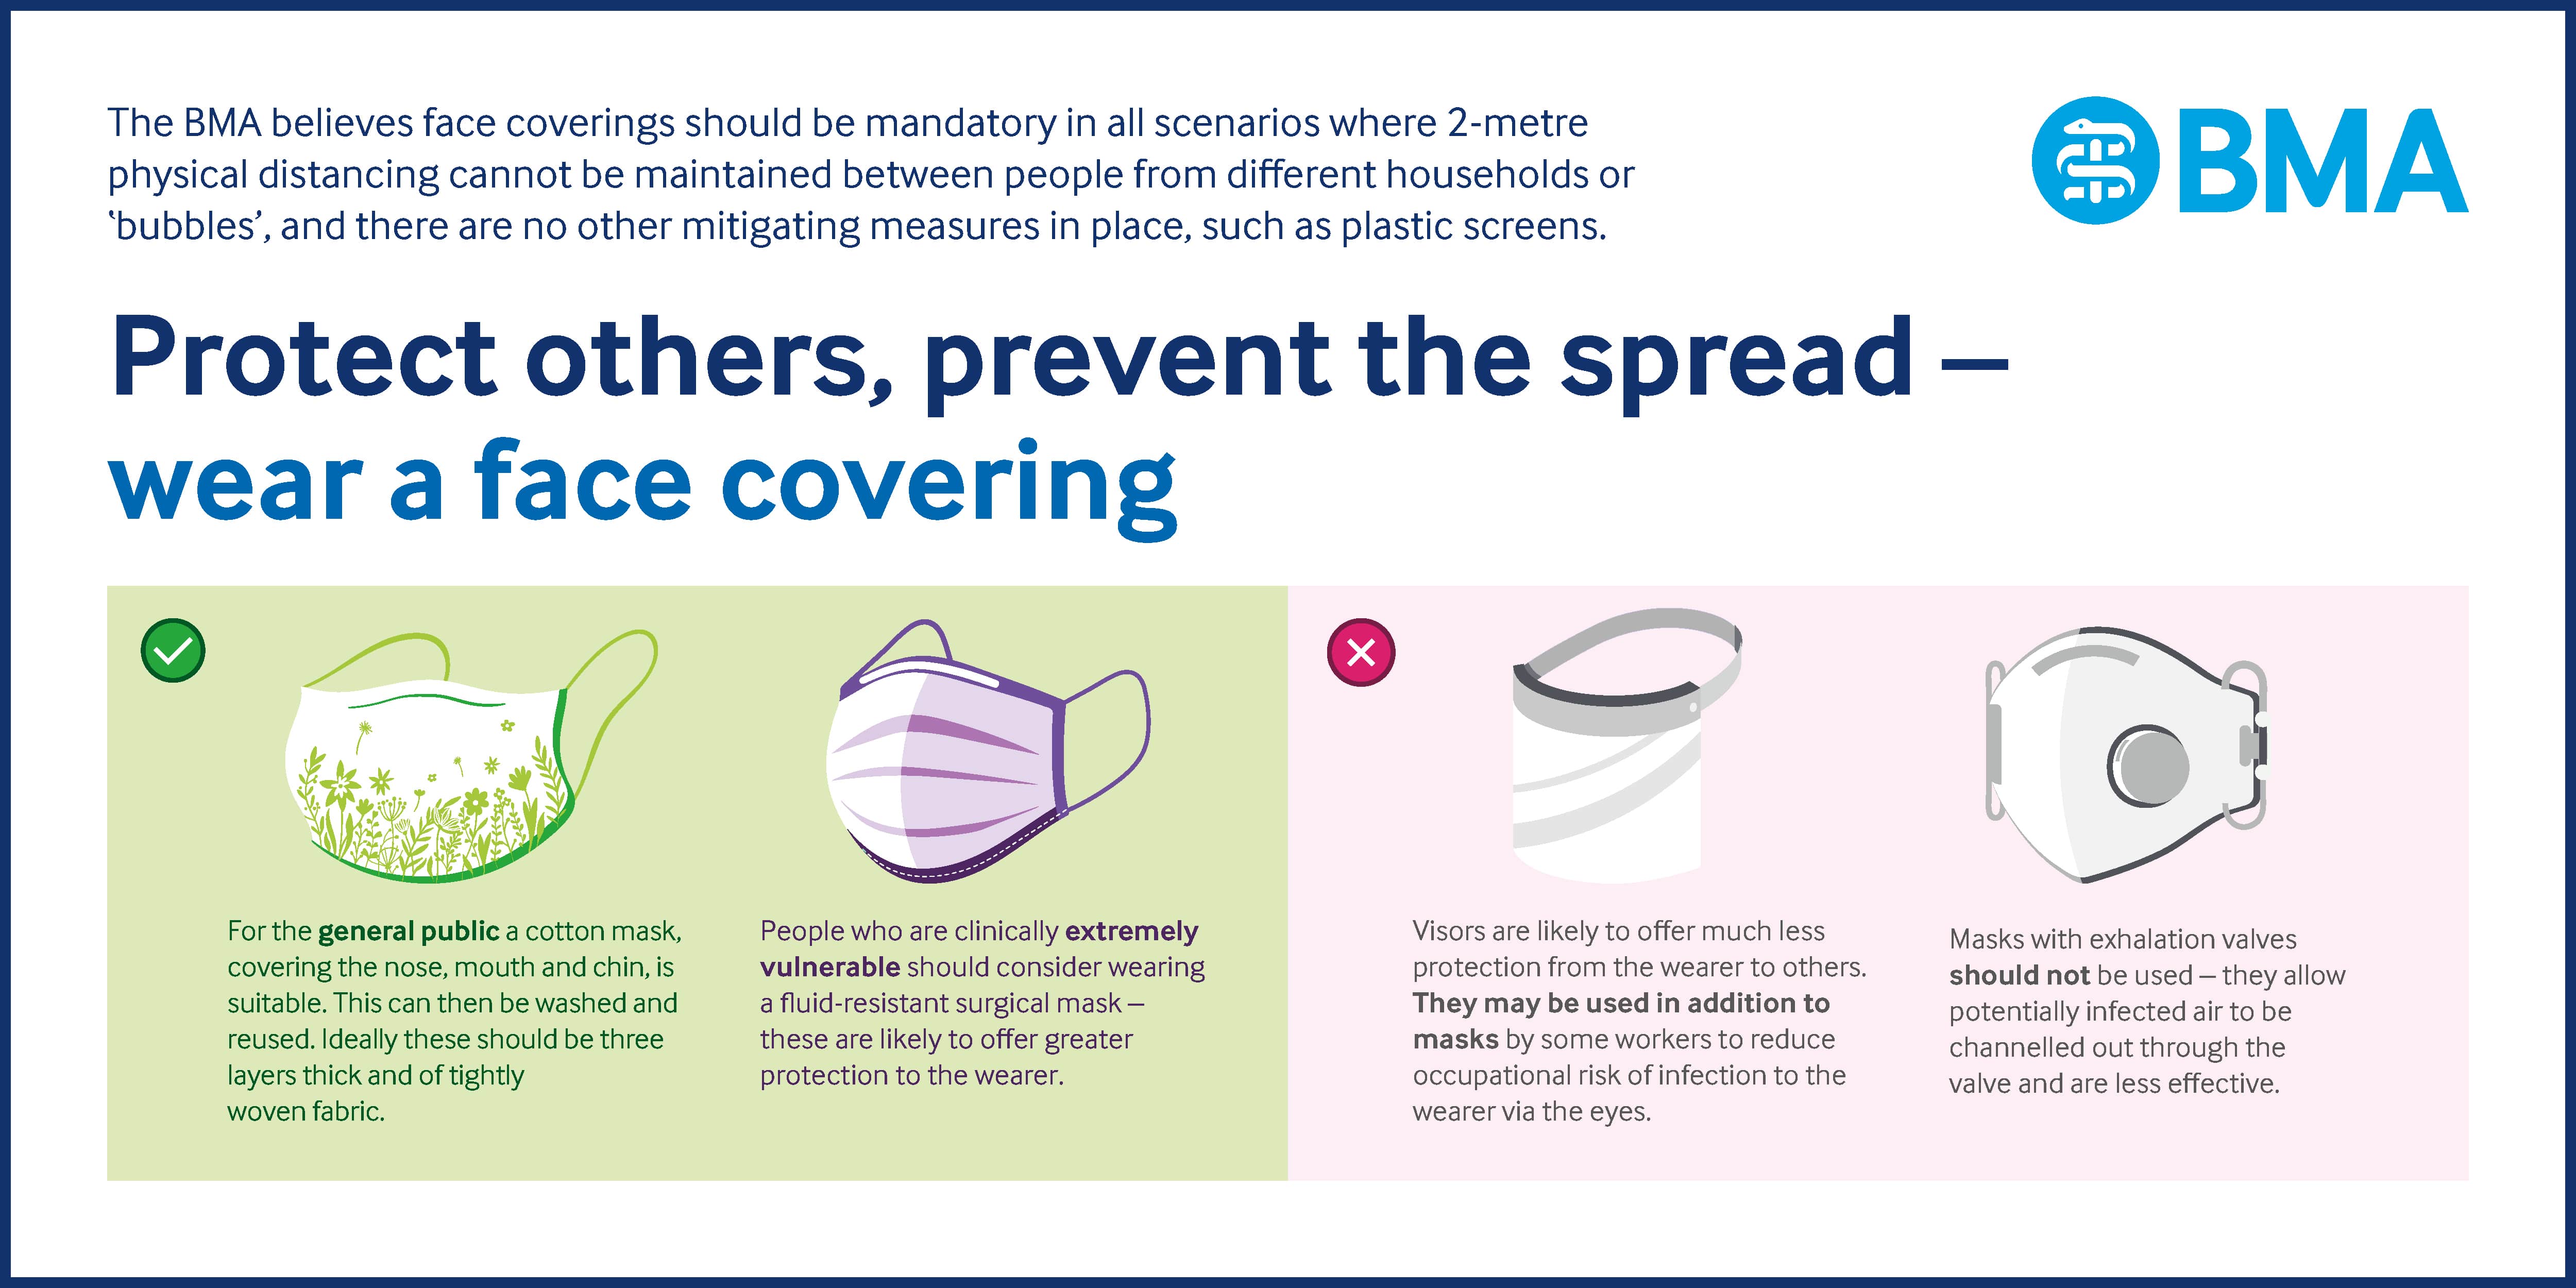 COVID-19 - wear cotton or surgical face mask coverings, don't wear visors or masks with valves, bma policy